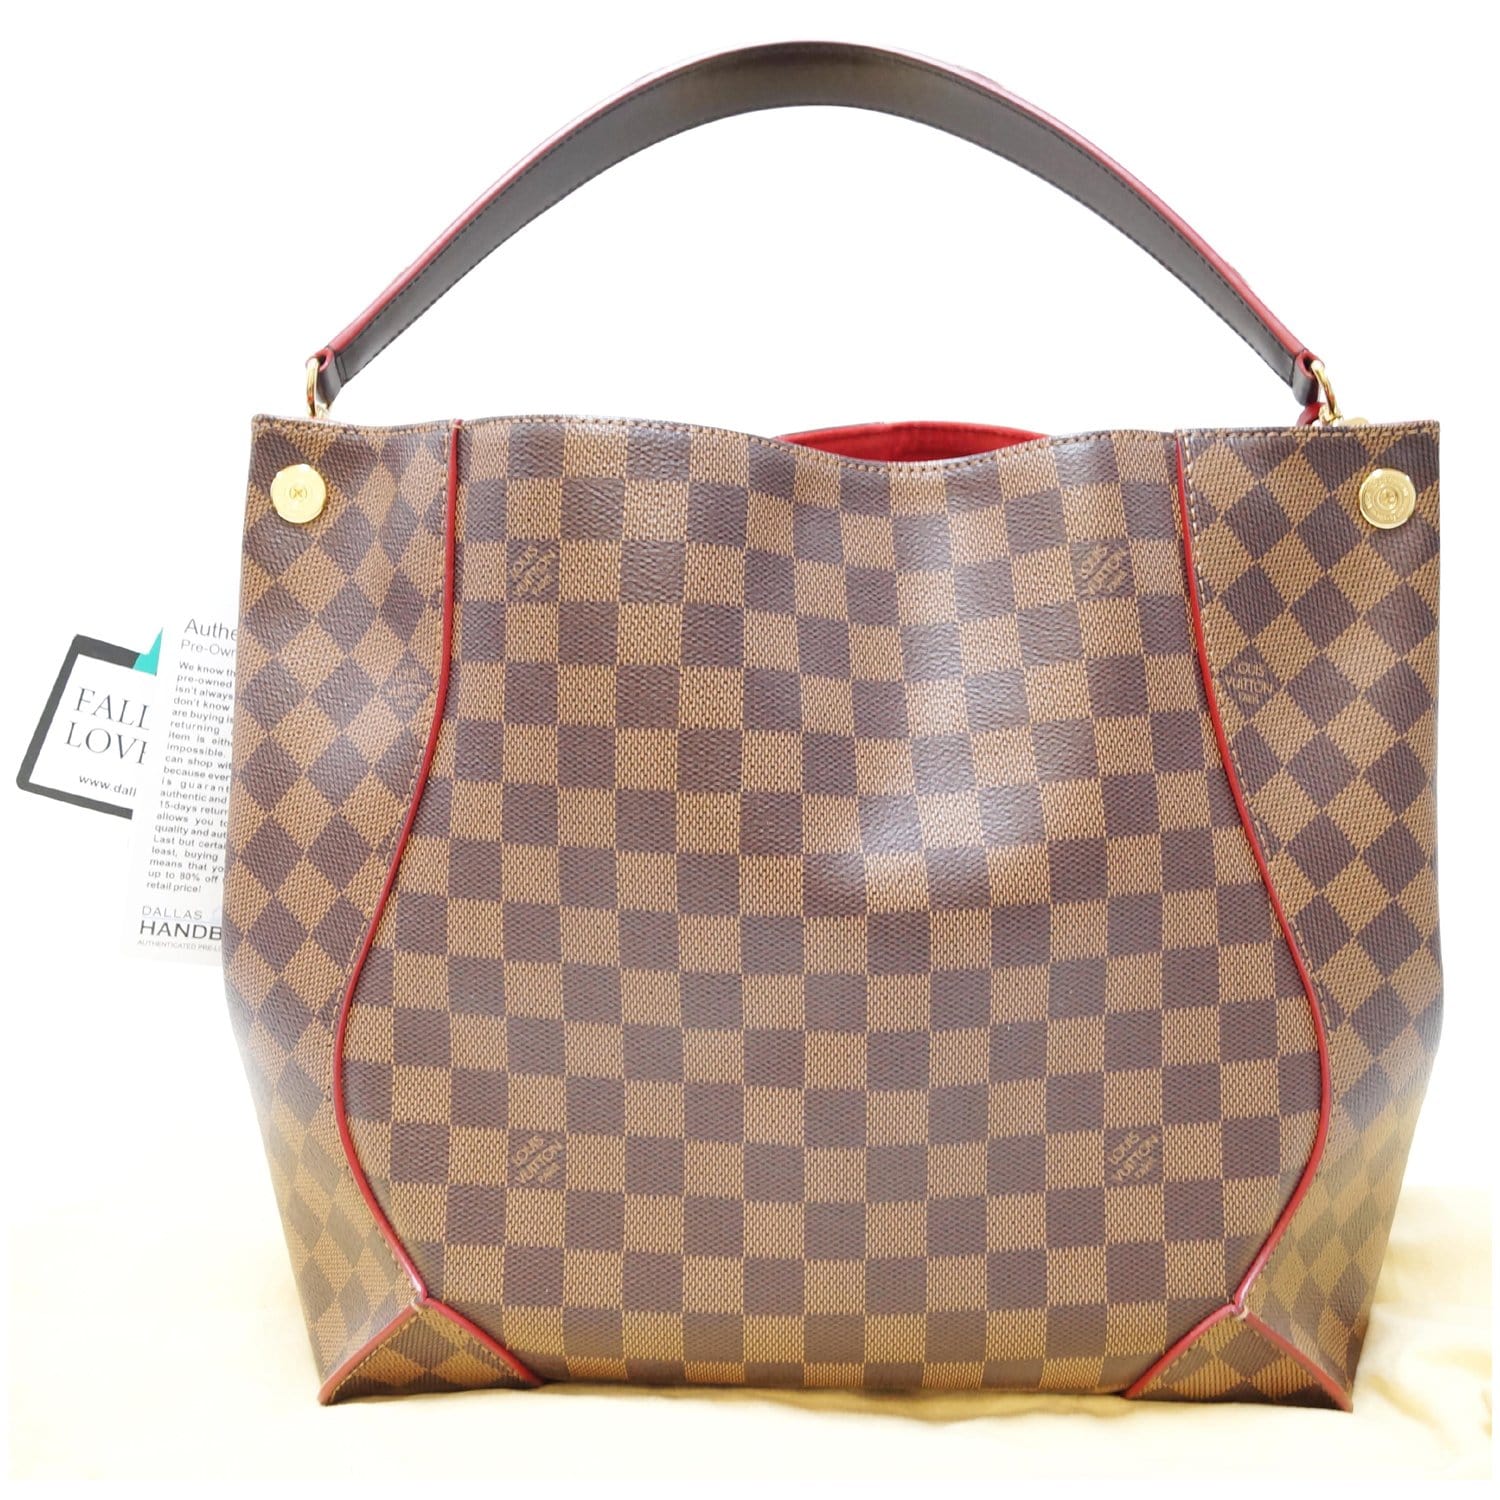 Why Isn't That Louis Vuitton Bag Ever On Sale?